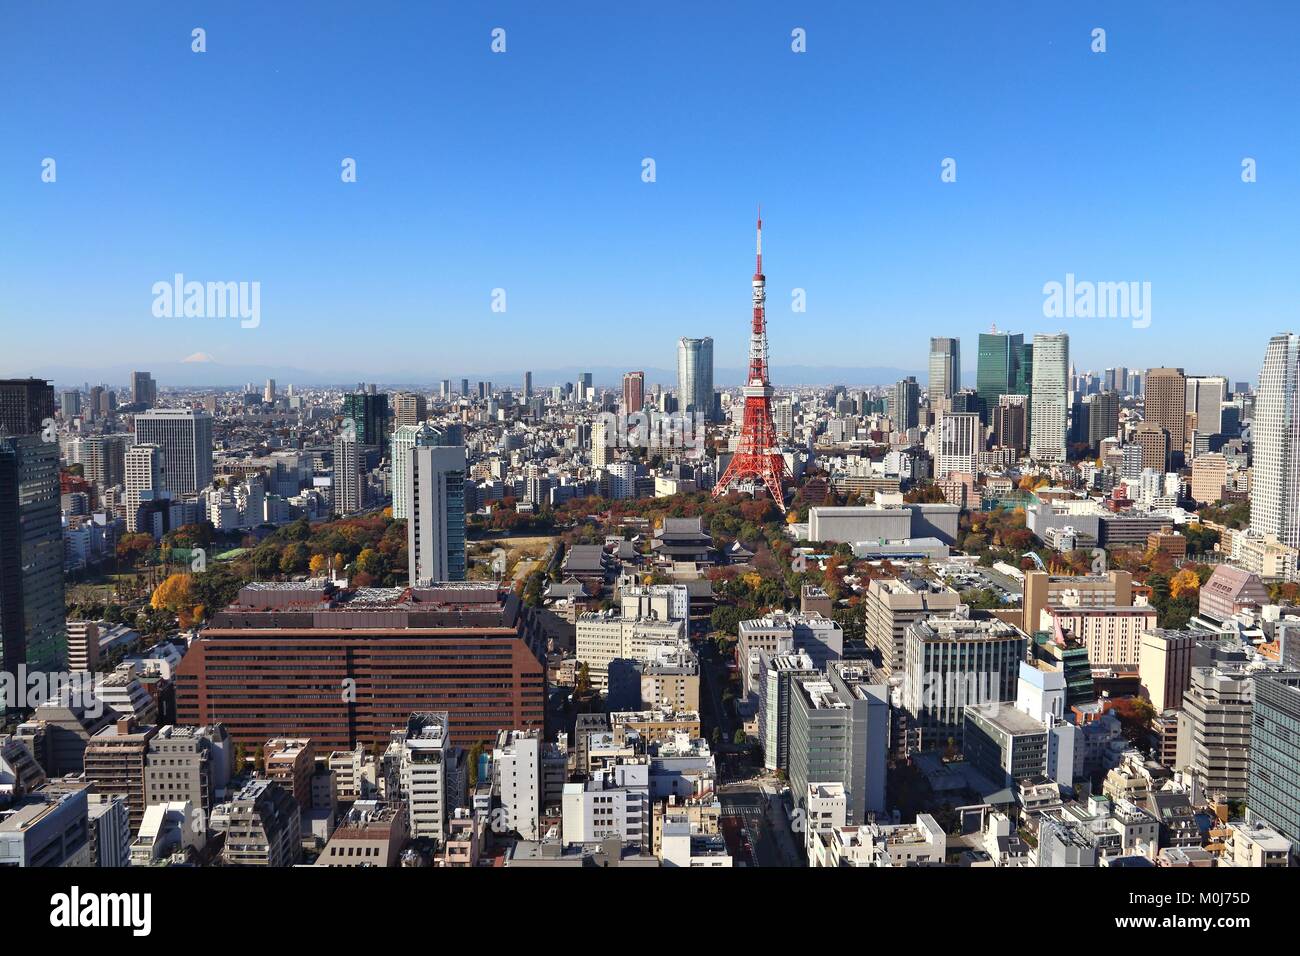 Tokyo city skyline - aerial view with Roppongi and Minato wards. Mount Fuji visible in far left background. Stock Photo